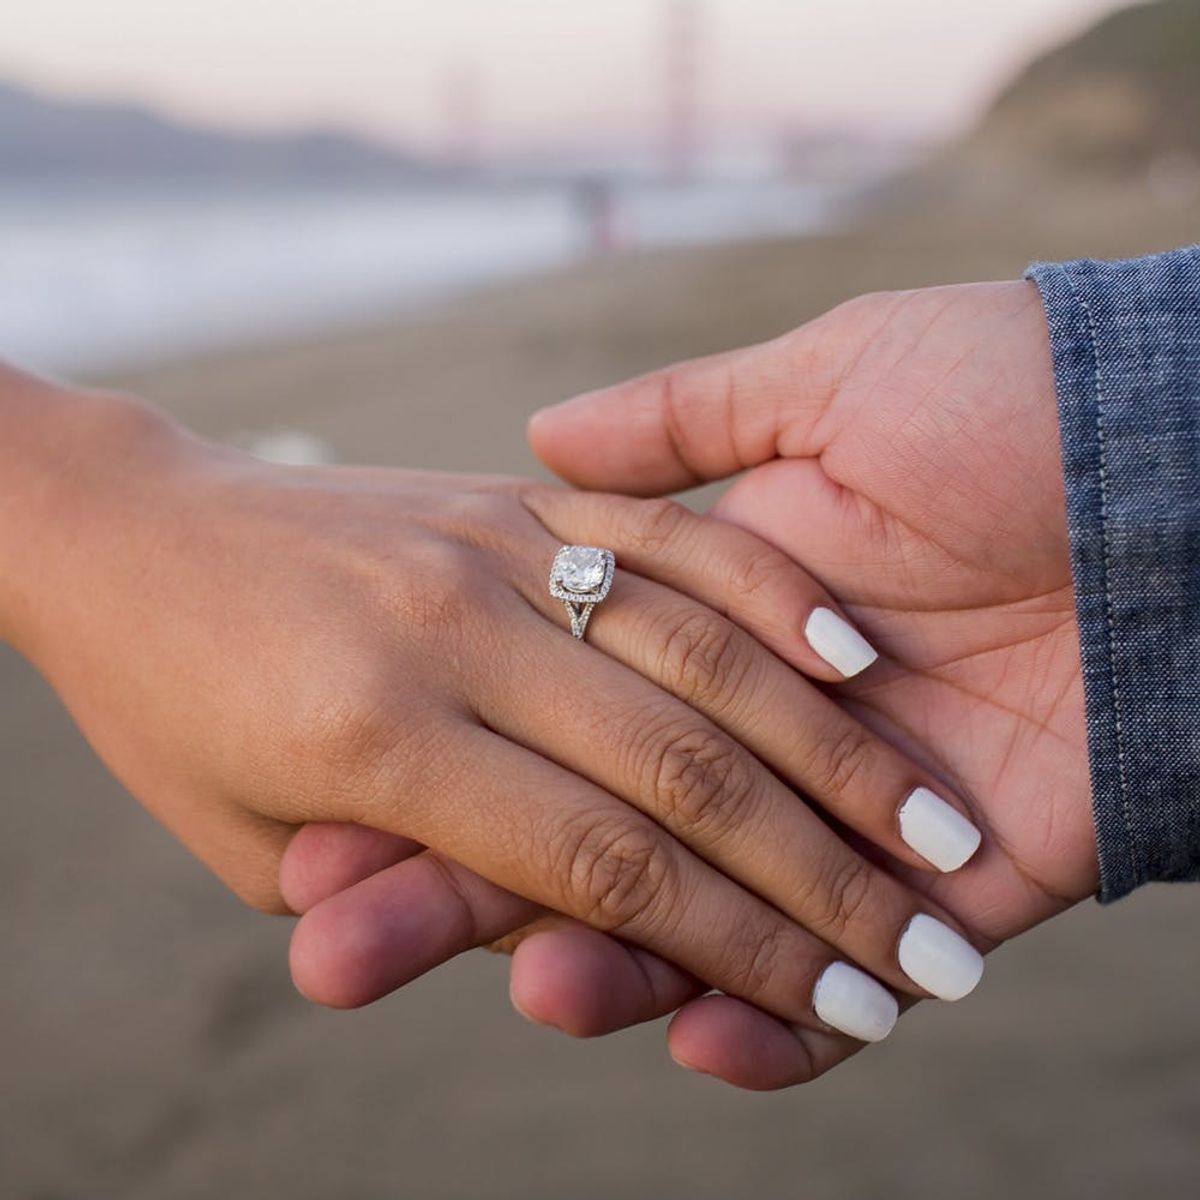 Here’s How to Keep Your Engagement Ring Sparkling